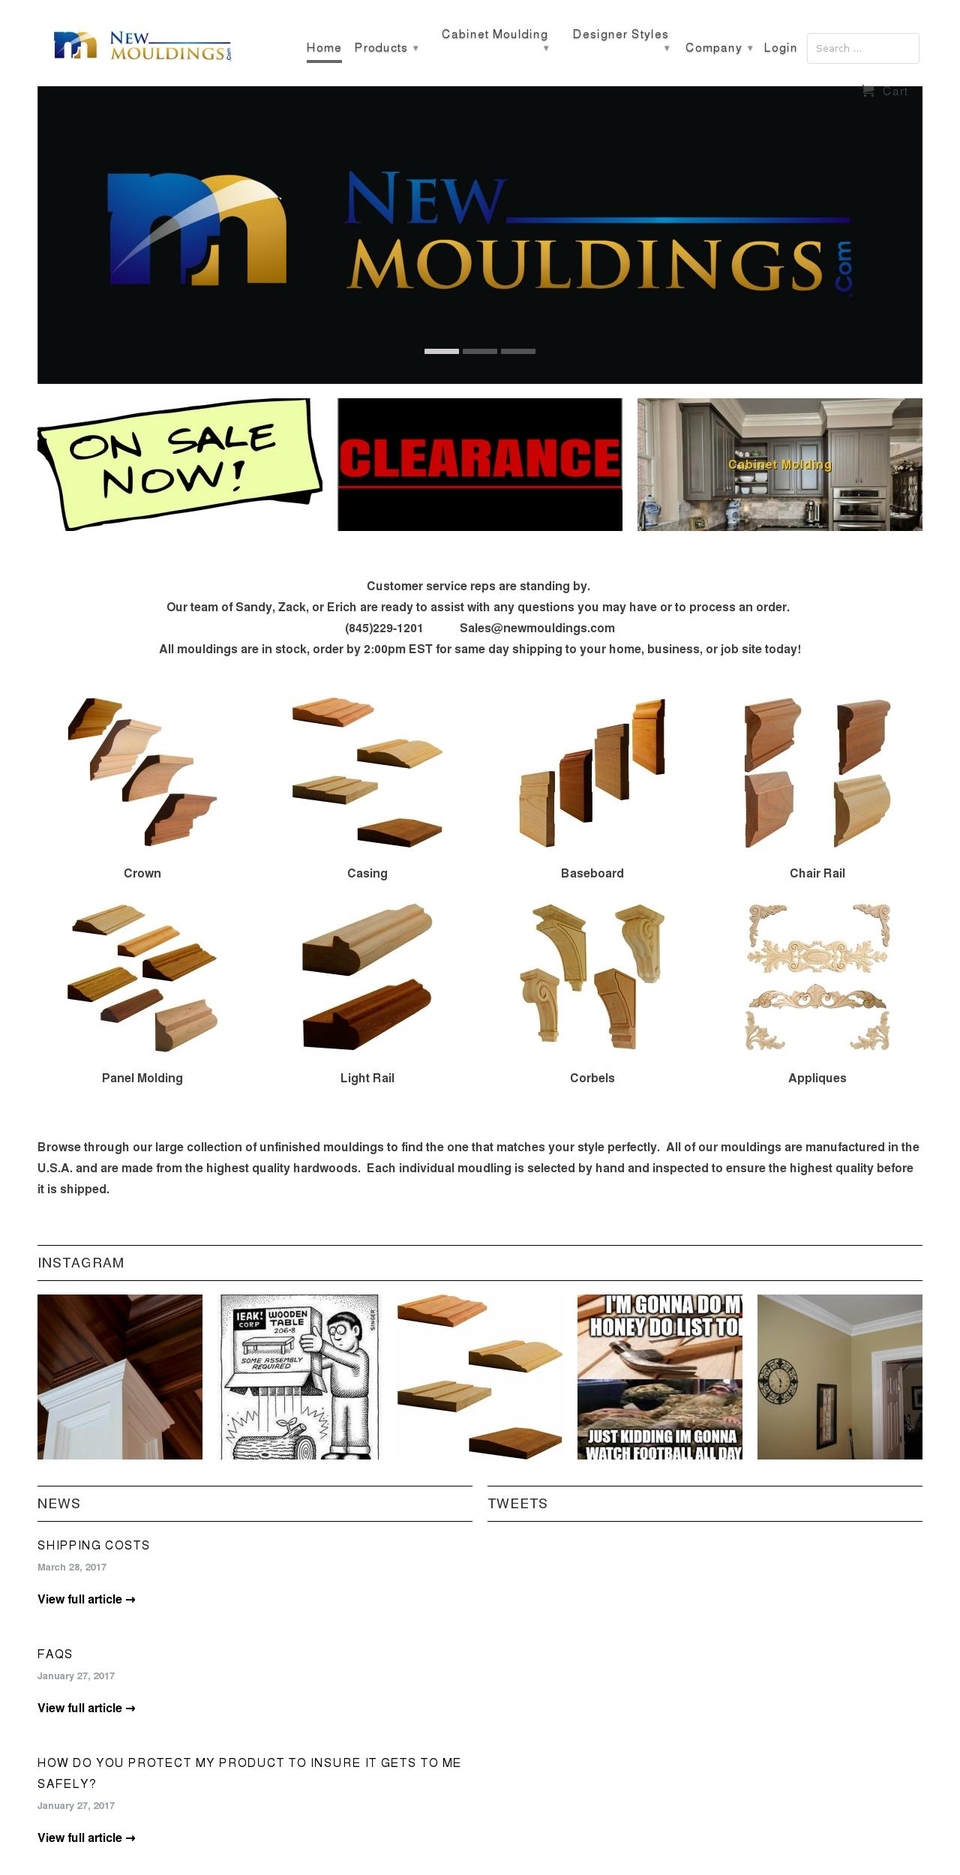 UPDATED Shopify theme site example newmouldings.com